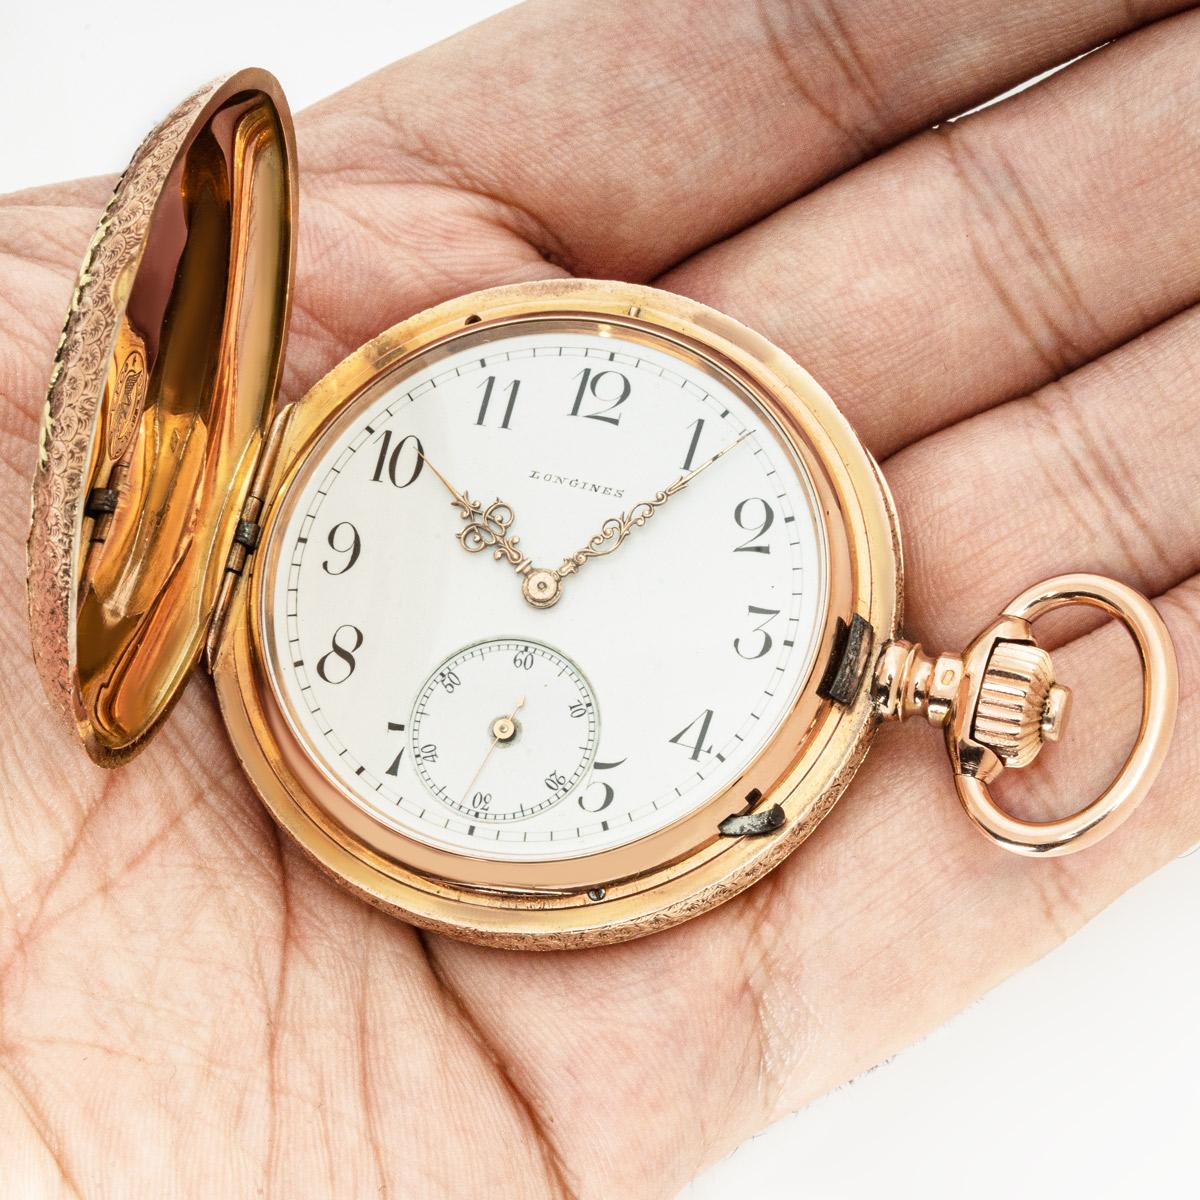 Longines. A Rare Hunting Festival Rose Gold Full Hunter Pocket Watch C1900 For Sale 3